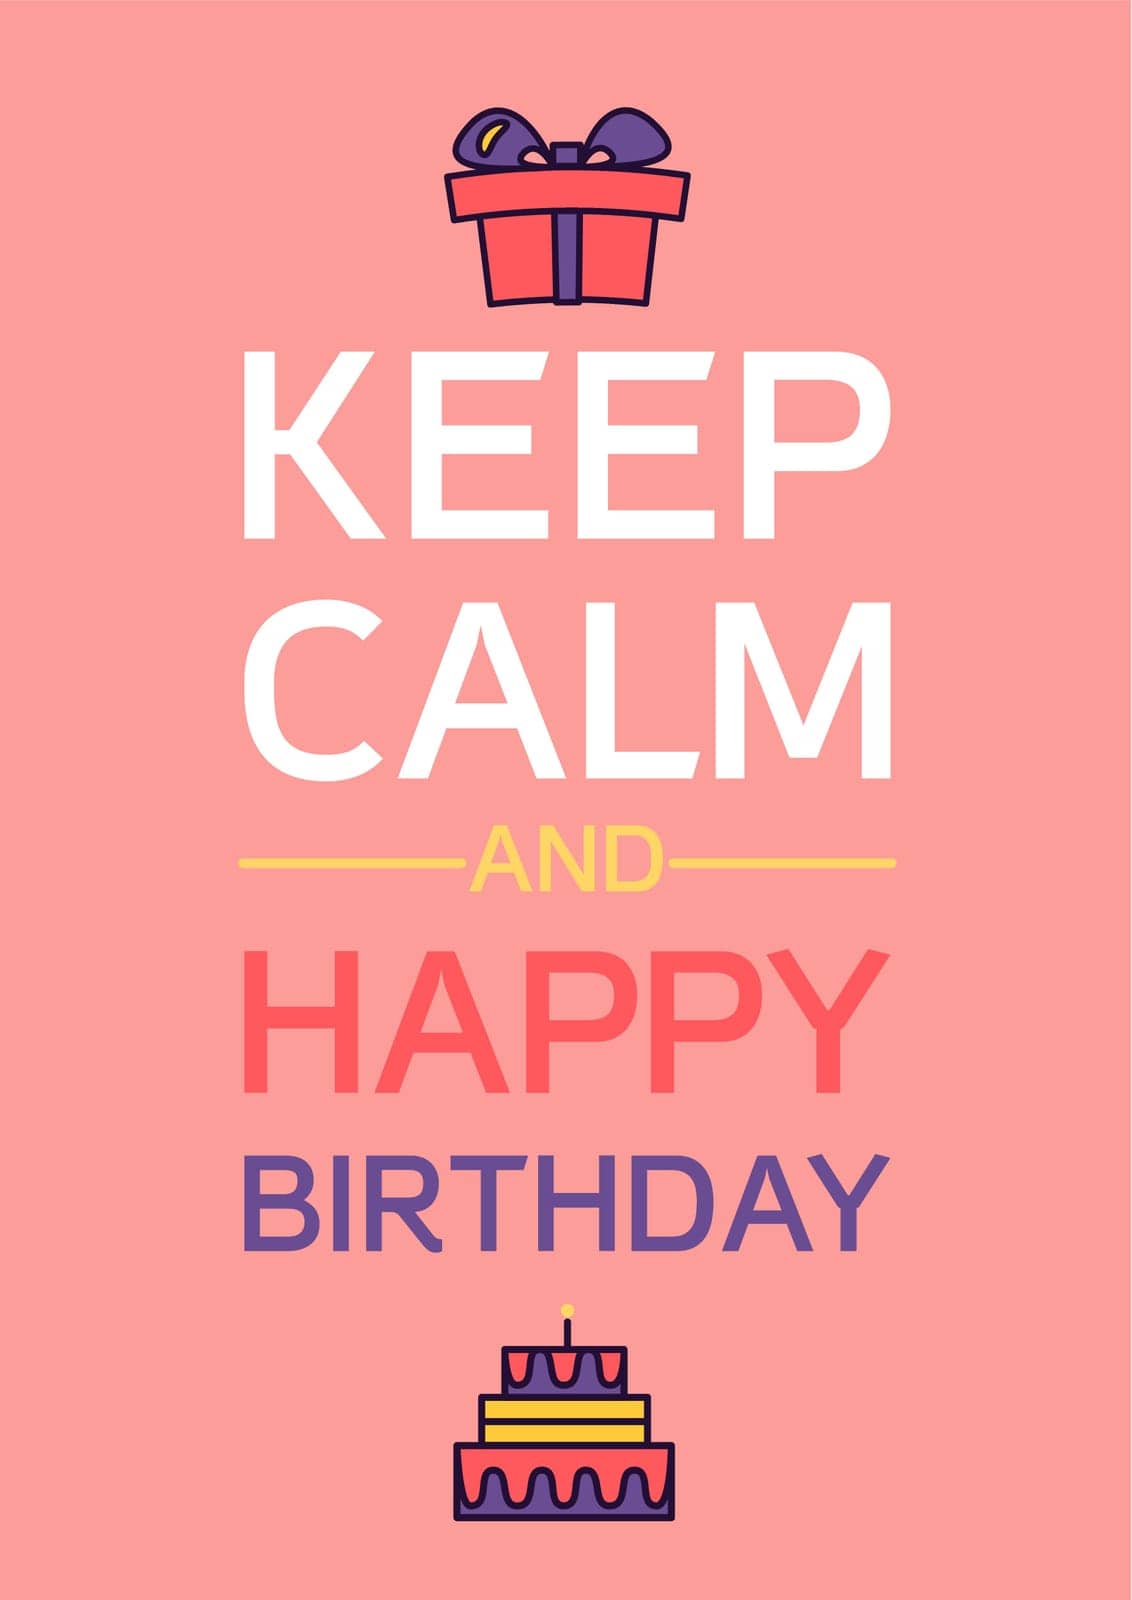 Happy Birthday And Keep Calm by barsrsind